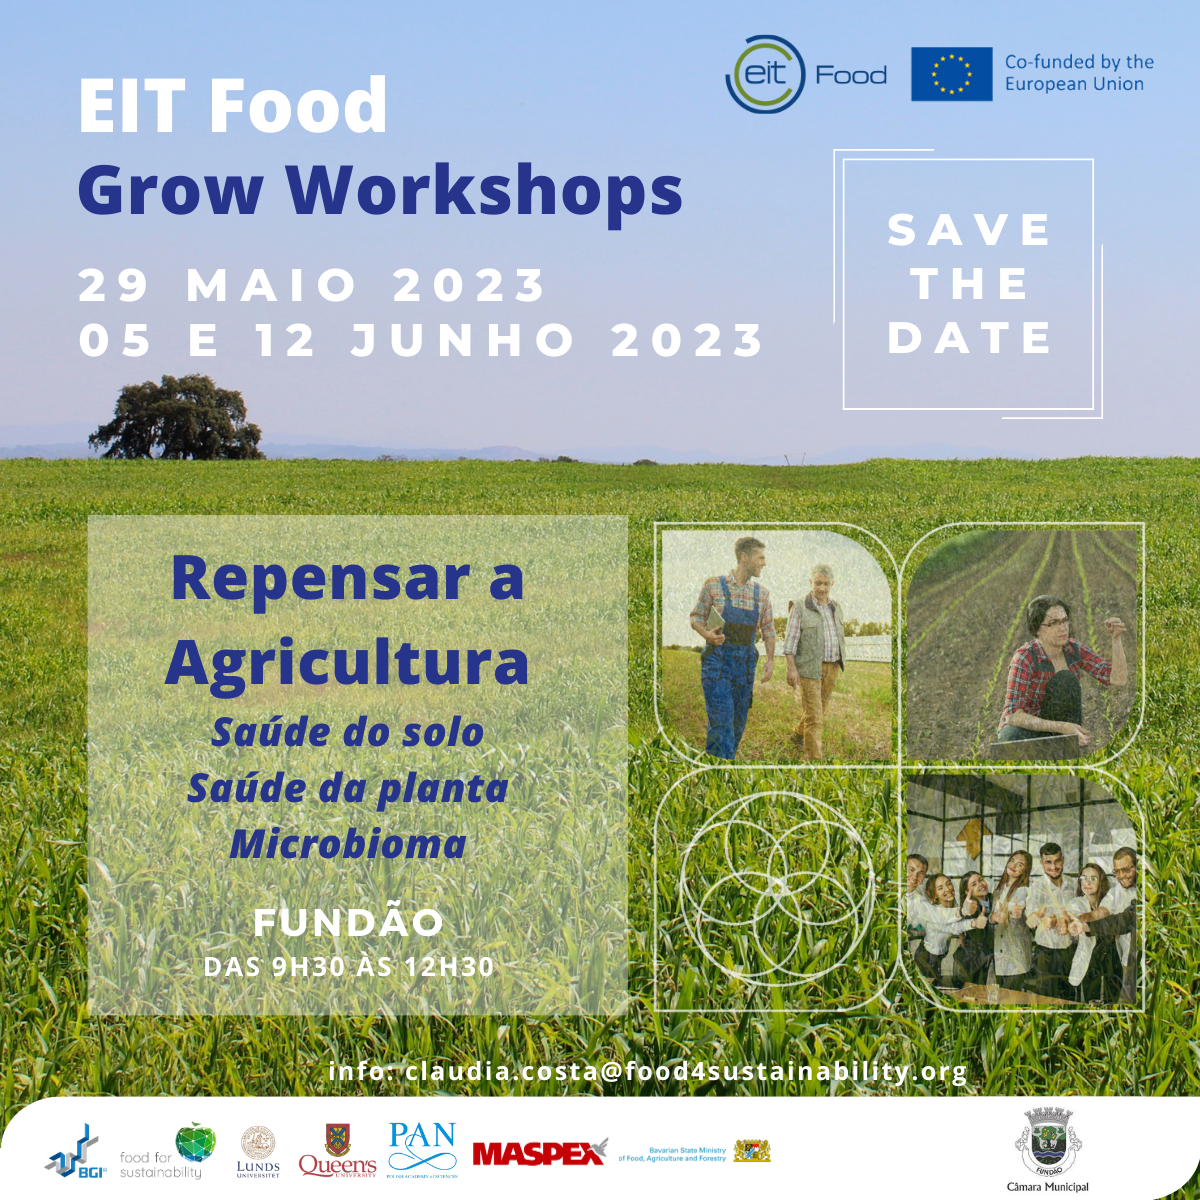 EIT Food save the date 2023 Fundao